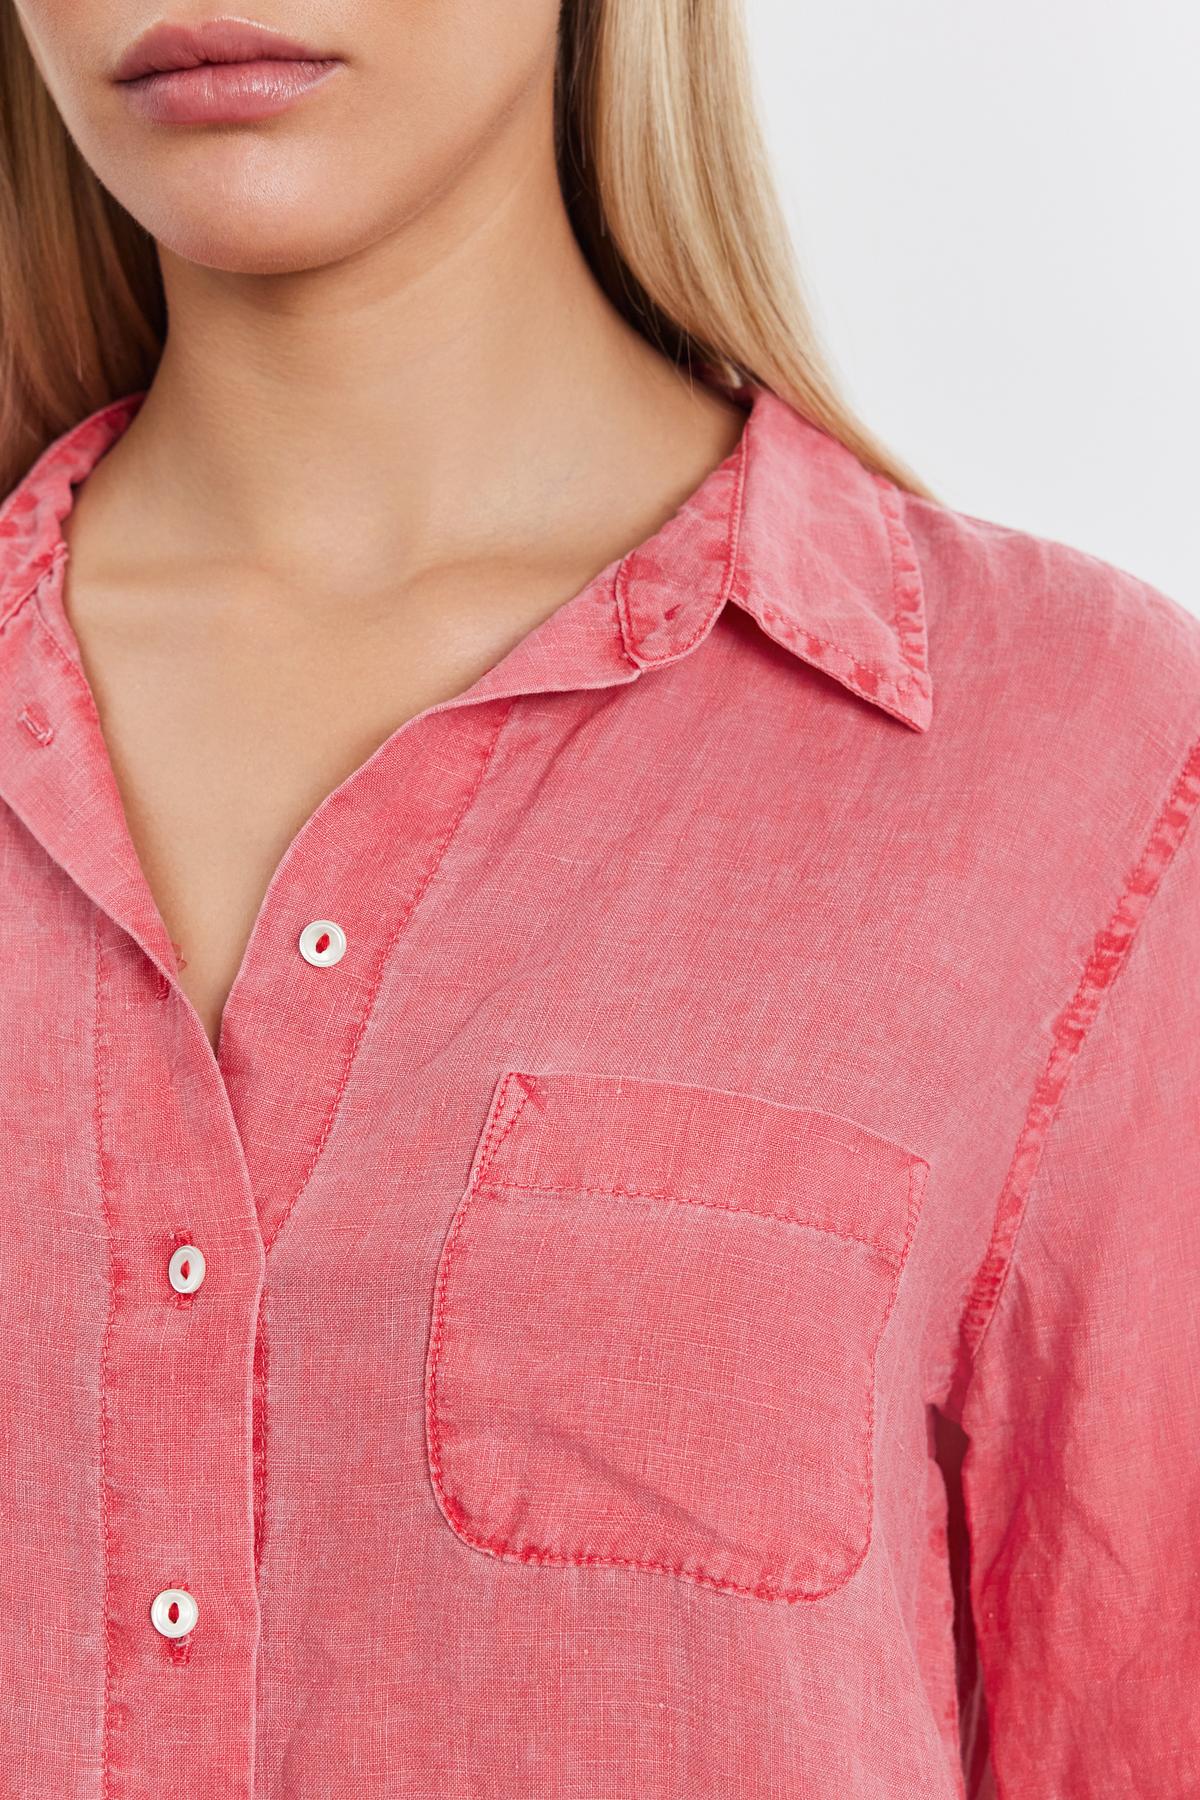 Close-up of a woman wearing a NATALIA LINEN BUTTON-UP SHIRT in coral pink from Velvet by Graham & Spencer with a relaxed silhouette, collar, buttons, and a front pocket.-36910075838657